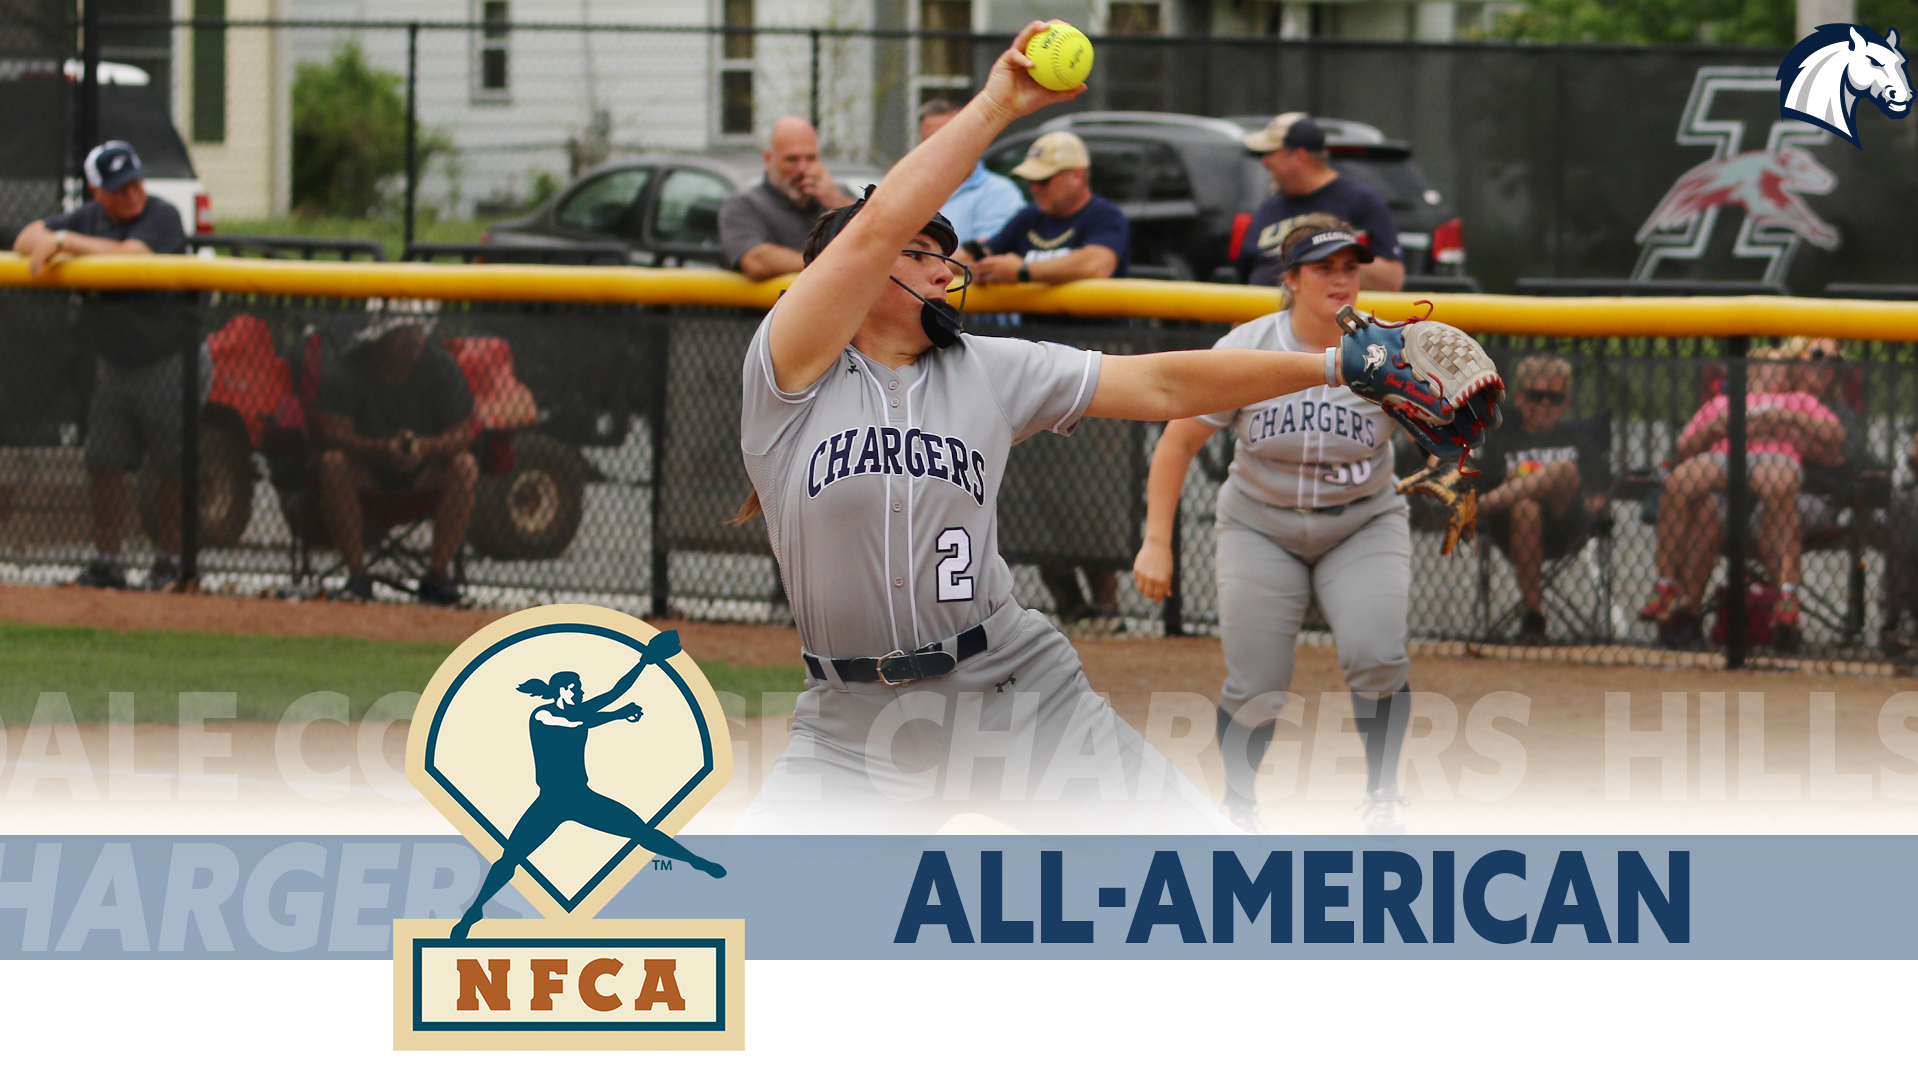 Chargers' Joni Russell named All-American by National Fastpitch Coaches Association